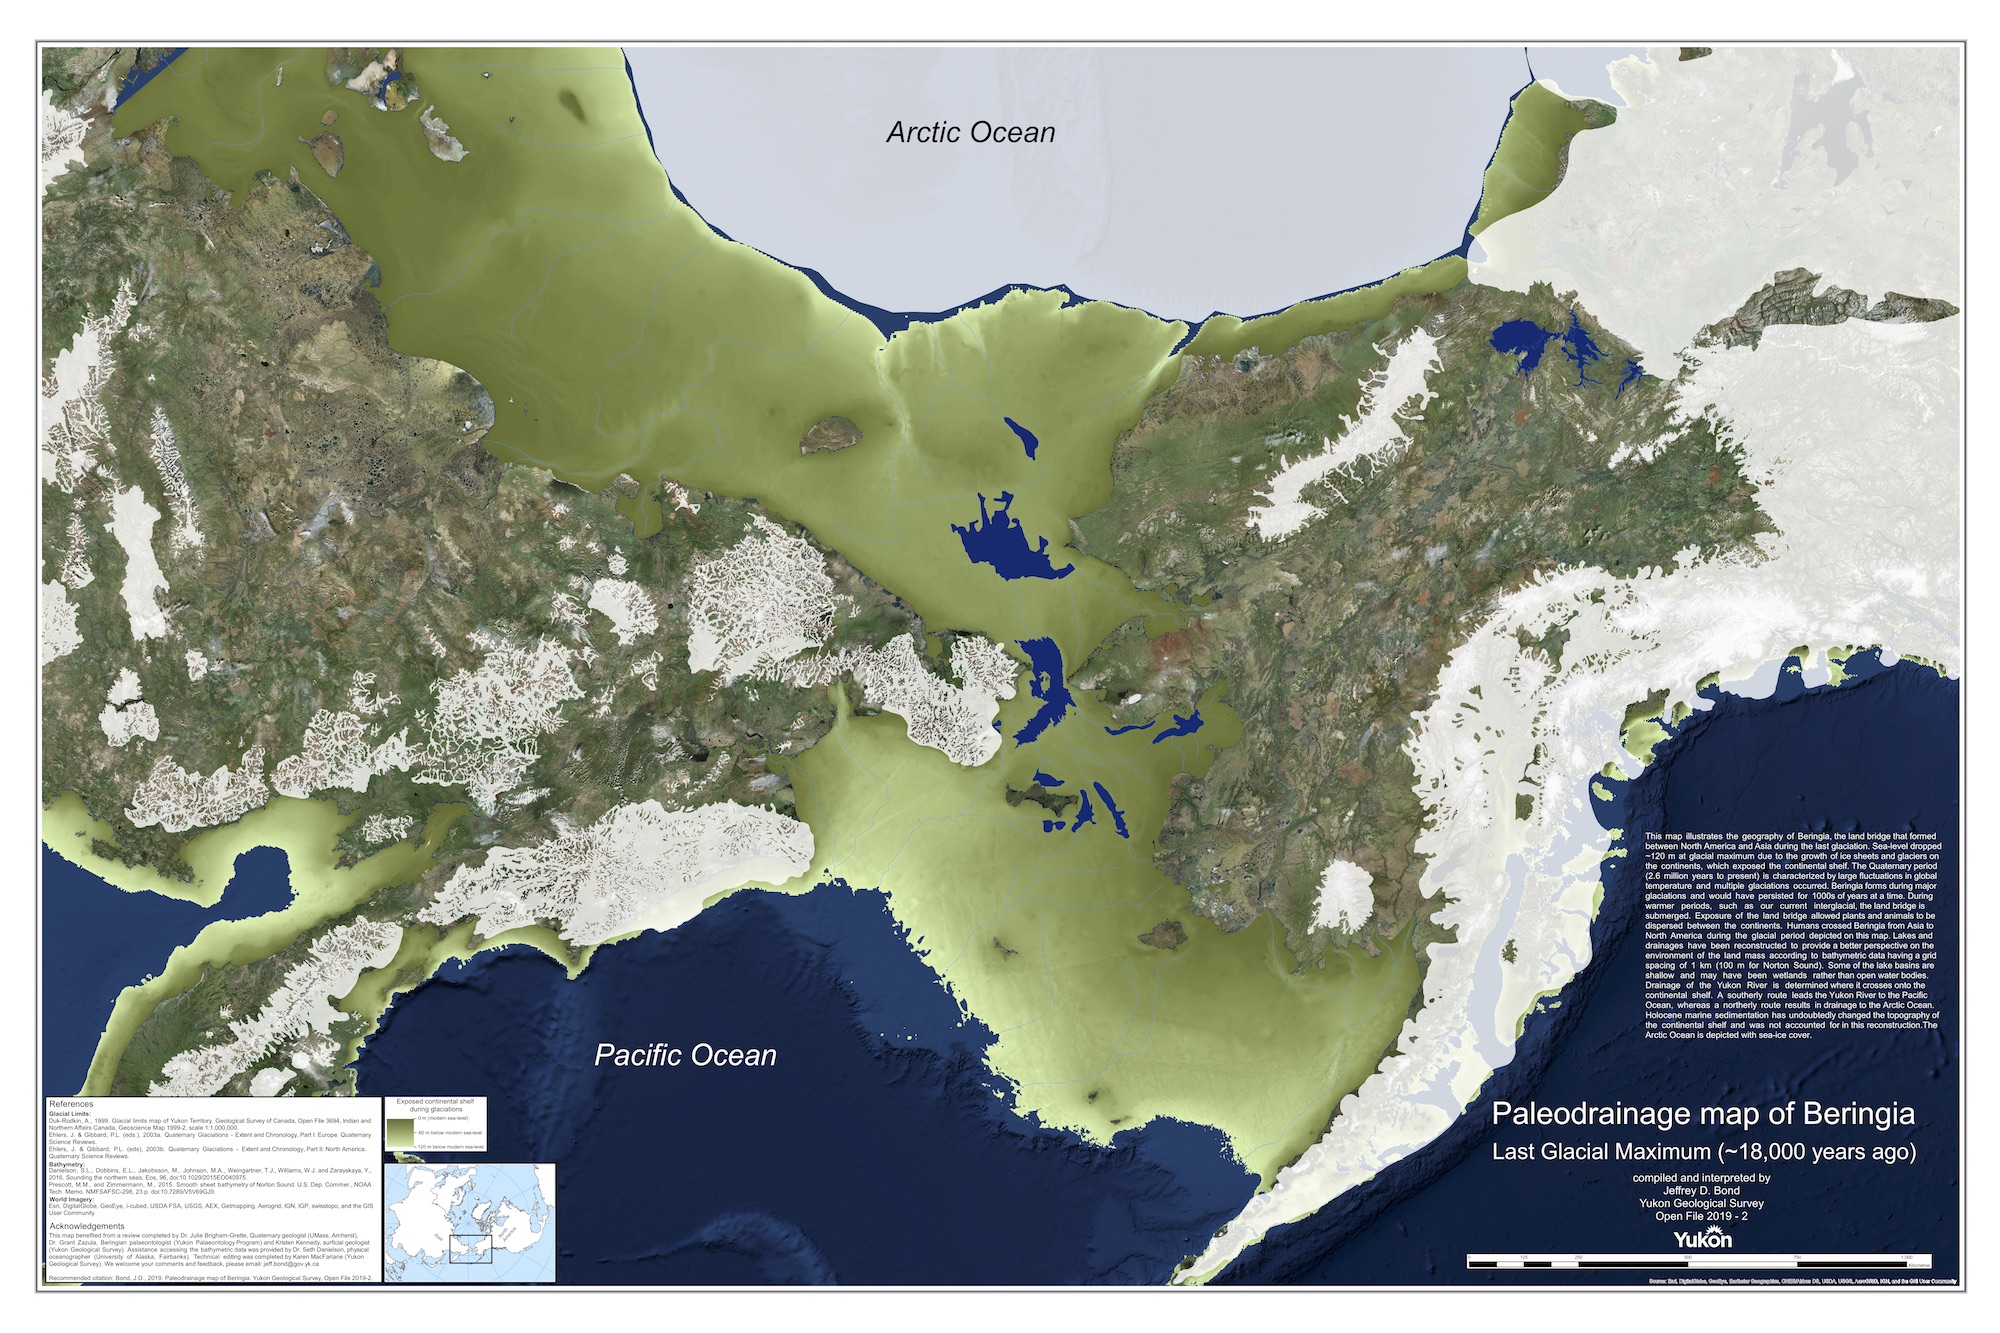 Bering Land Bridge formed much later than originally thought, study suggests